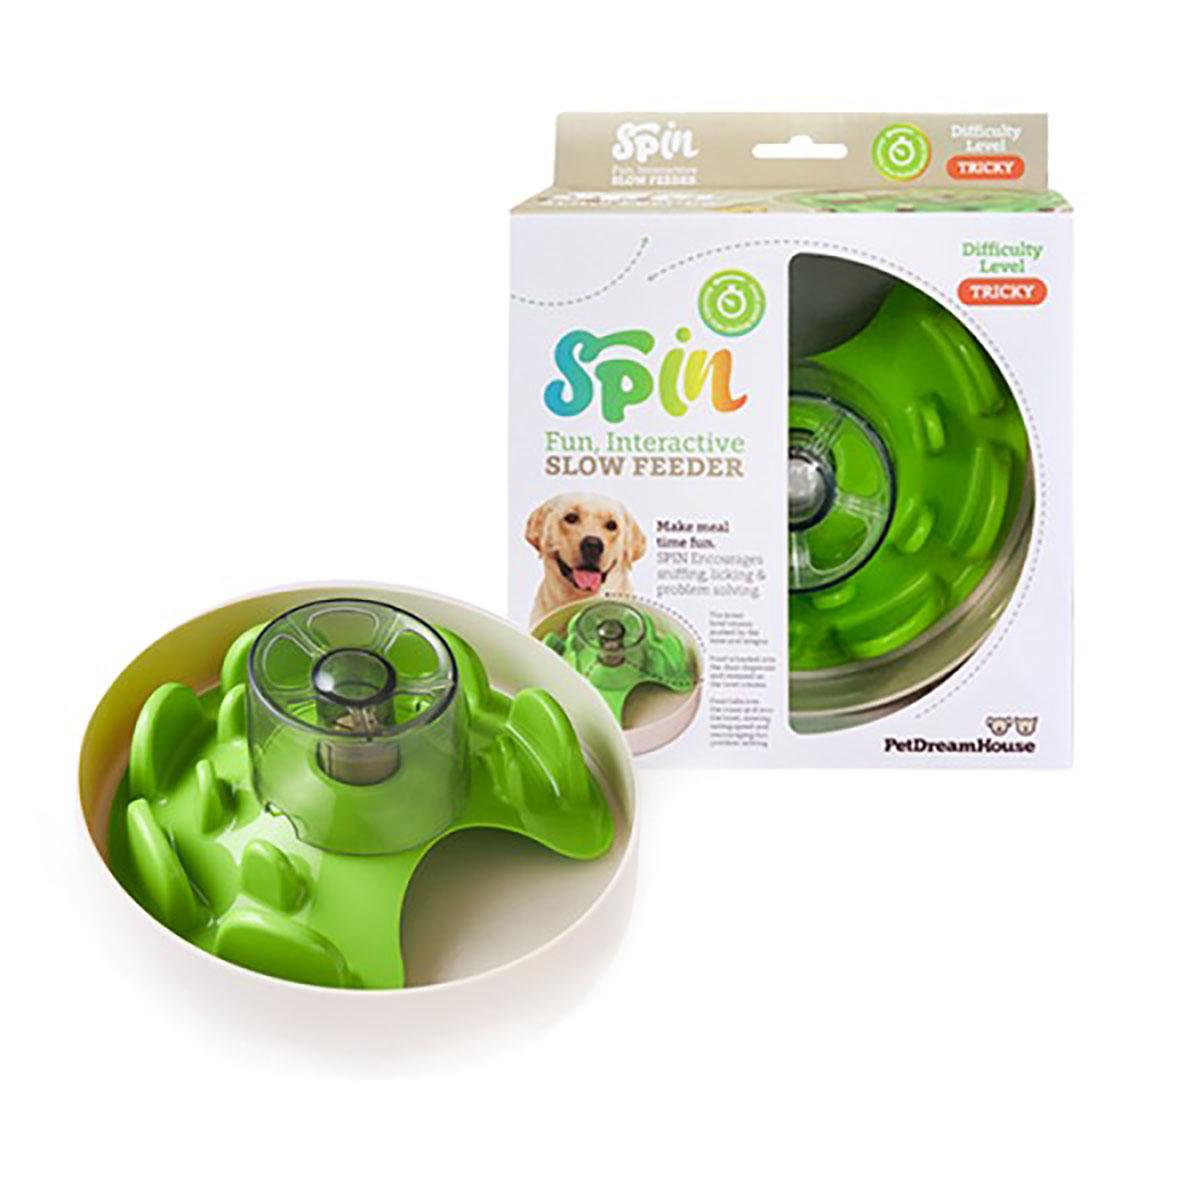 https://images.baxterboo.com/global/images/products/large/petdreamhouse-spin-interactive-slow-feeder-pet-bowl-ufo-green-6591.jpg